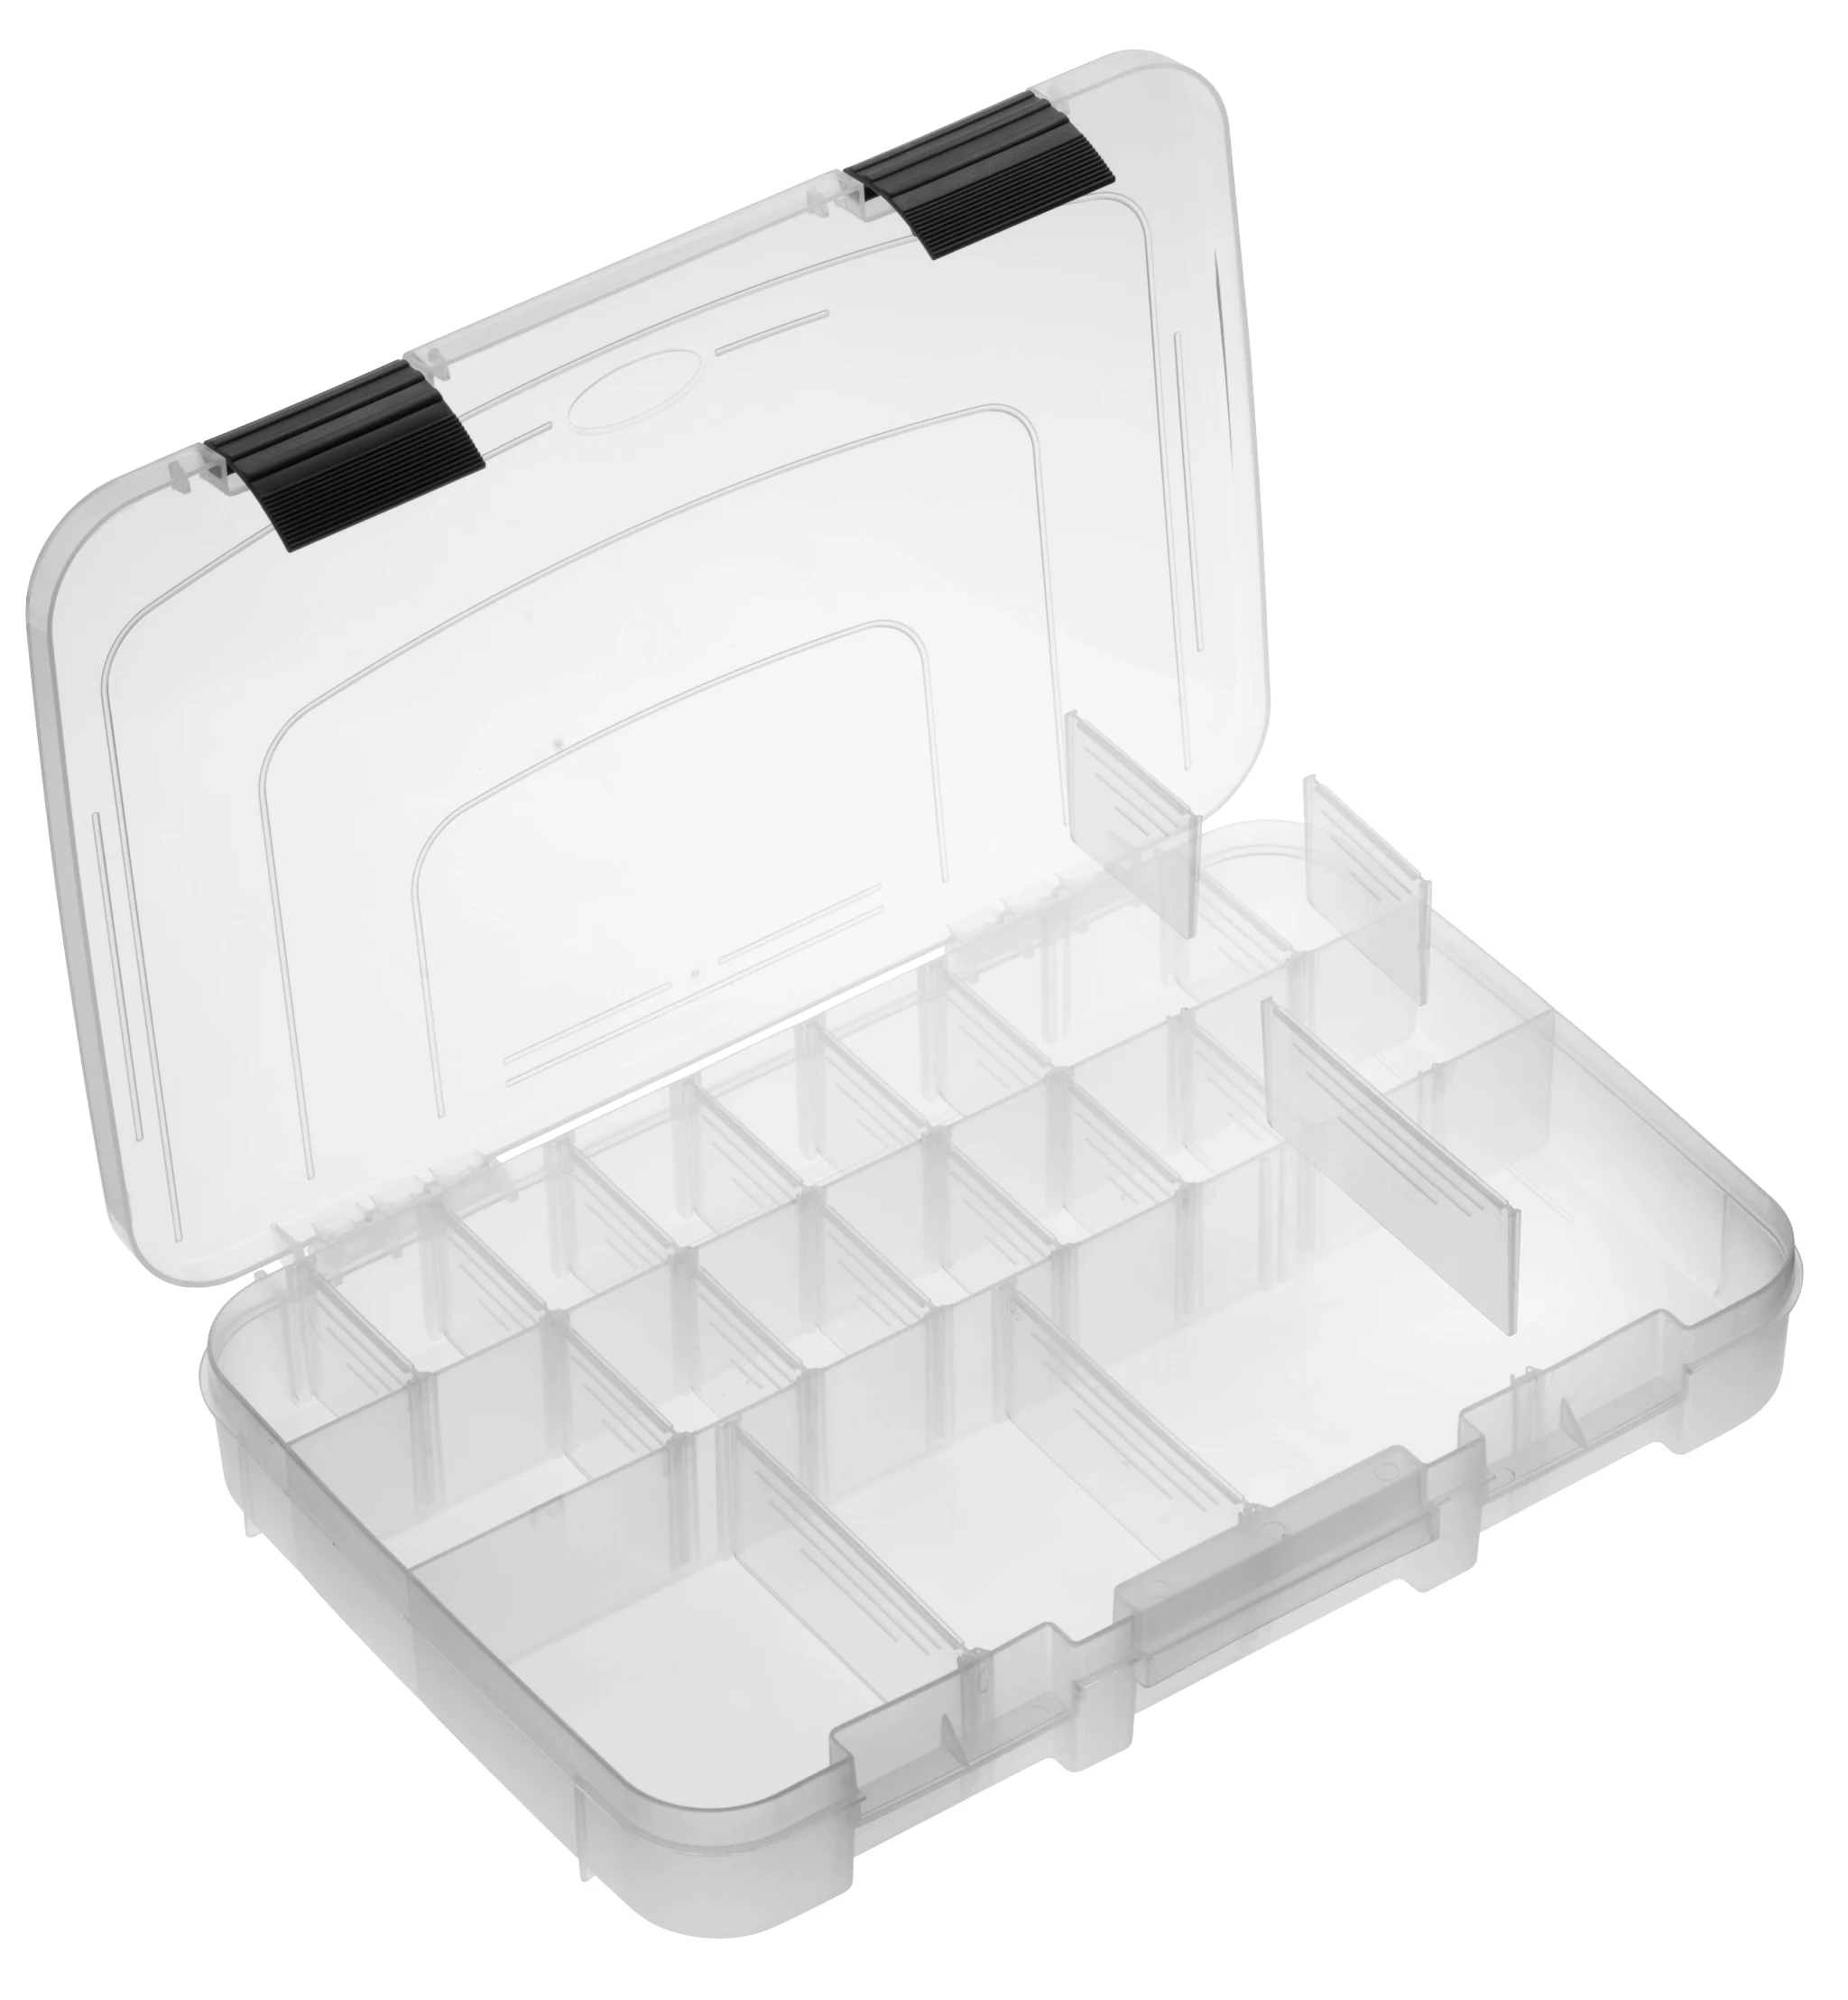 502 Superbox italian quality polypropylene tackle box to transport and secure storage outdoor sport equipment fishing tackle box